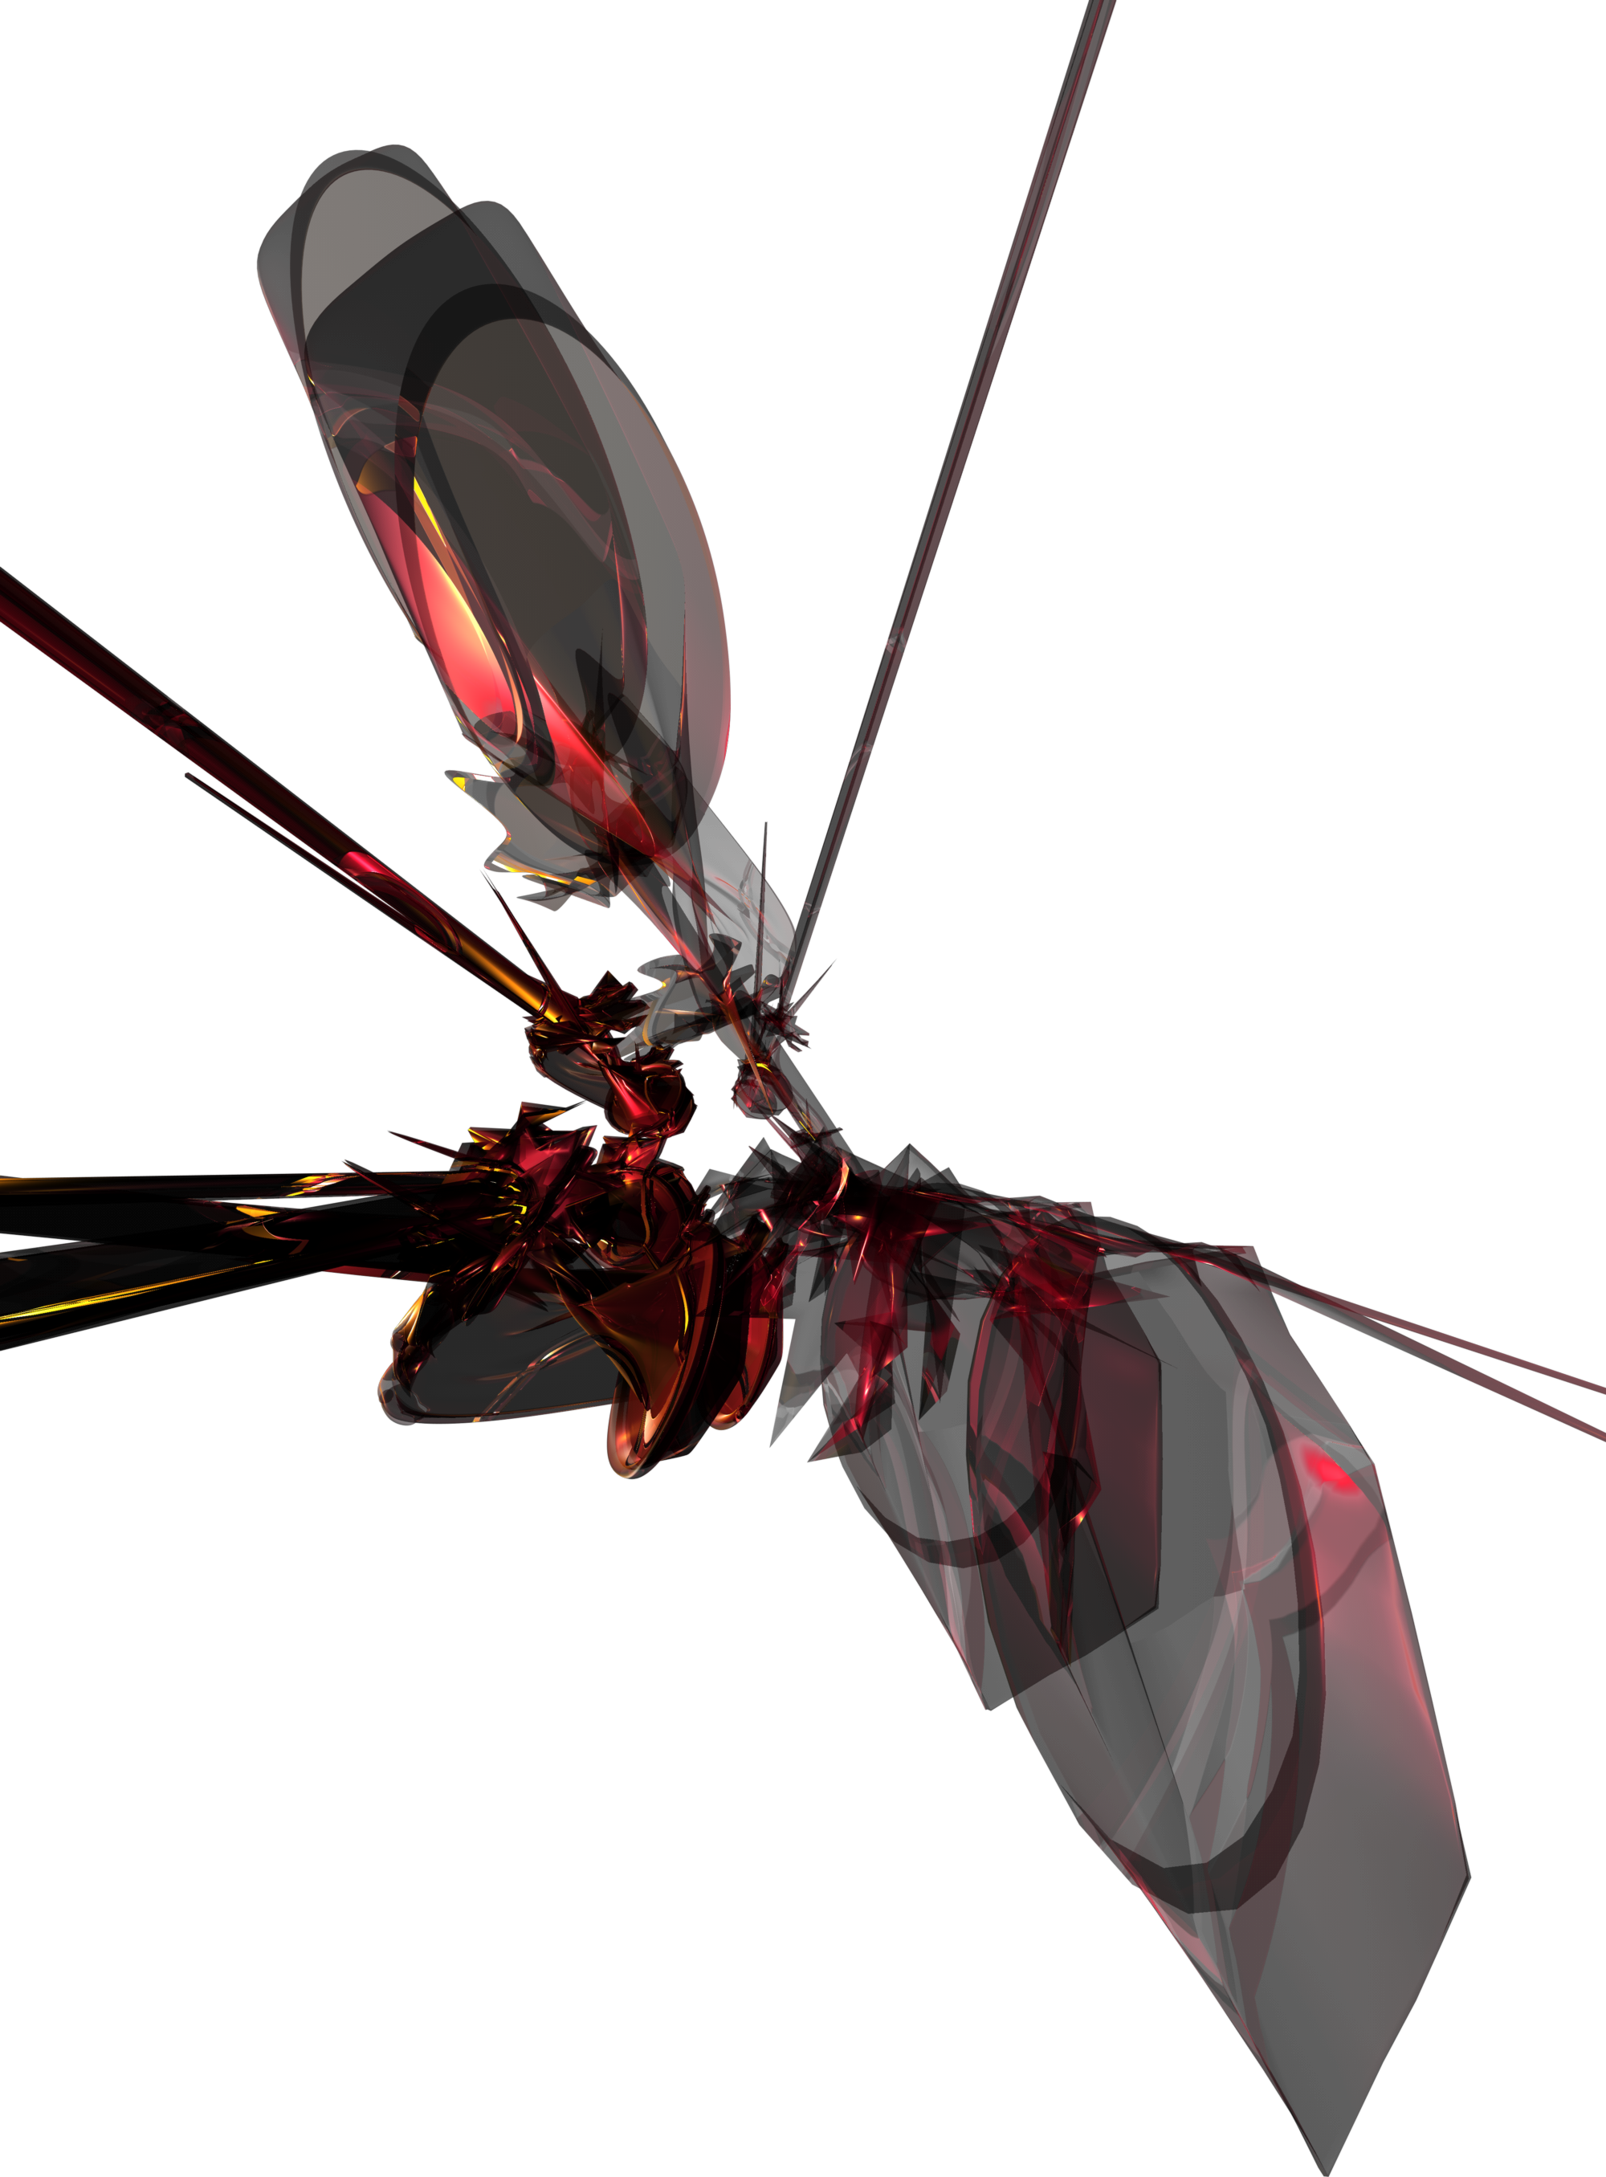 rY 2 - Abstract 3D Render by stinky666 on DeviantArt